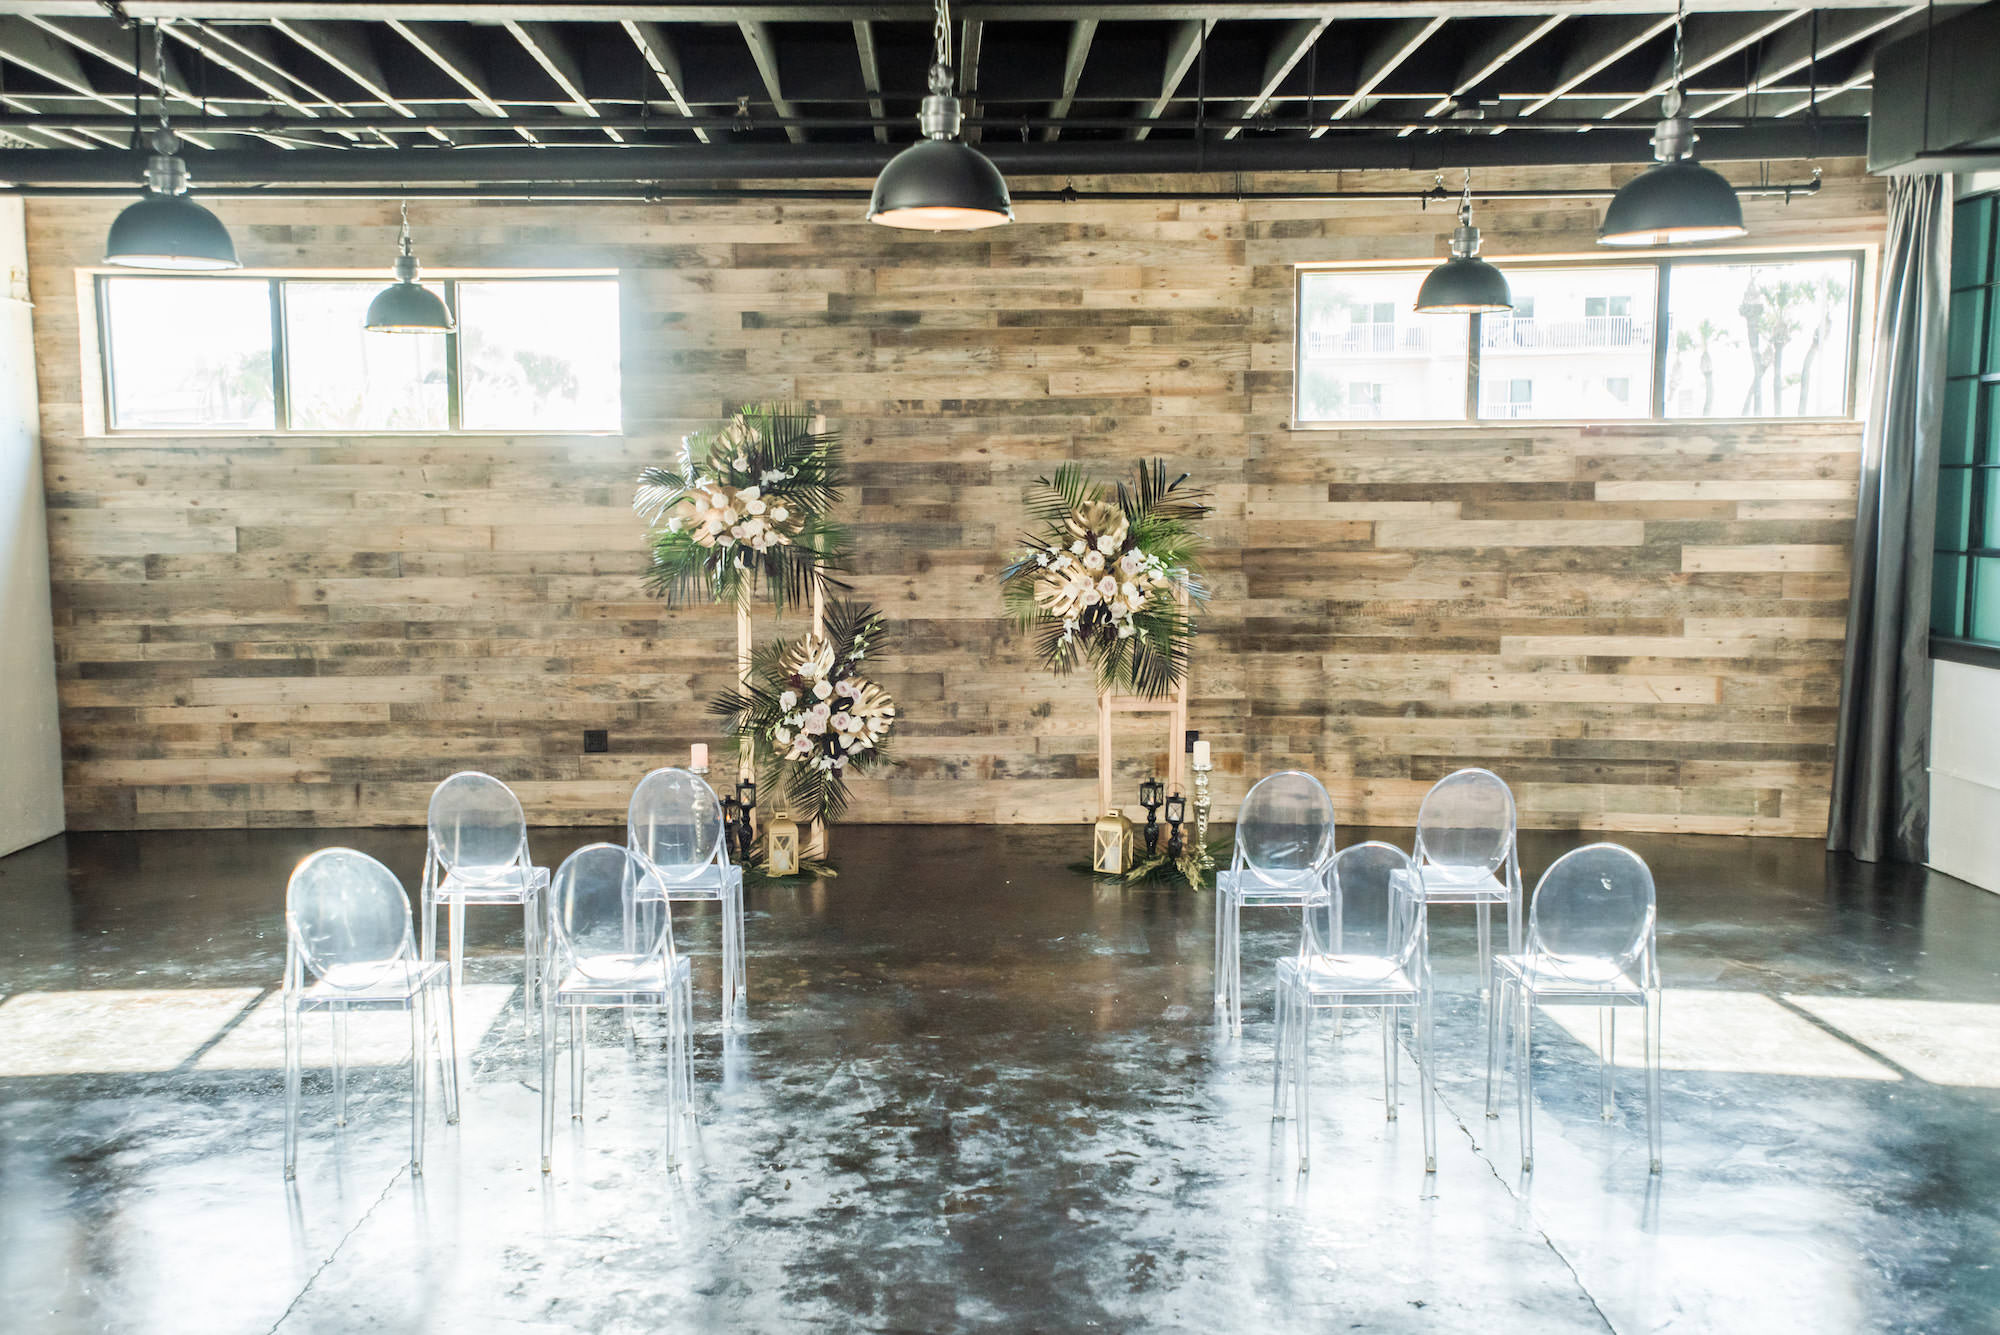 Dark Luxe, Romantic Wedding Styled Shoot Decor, Tall Gold Geometric Stands with Palm Fronds, Gold Monstera Leaves, Blush Pink Roses Floral Arrangements, Ghost Acrylic Chairs | Tampa Bay Wedding Planner Elegant Affairs by Design | Madeira Beach Wedding Venue The West Events Space